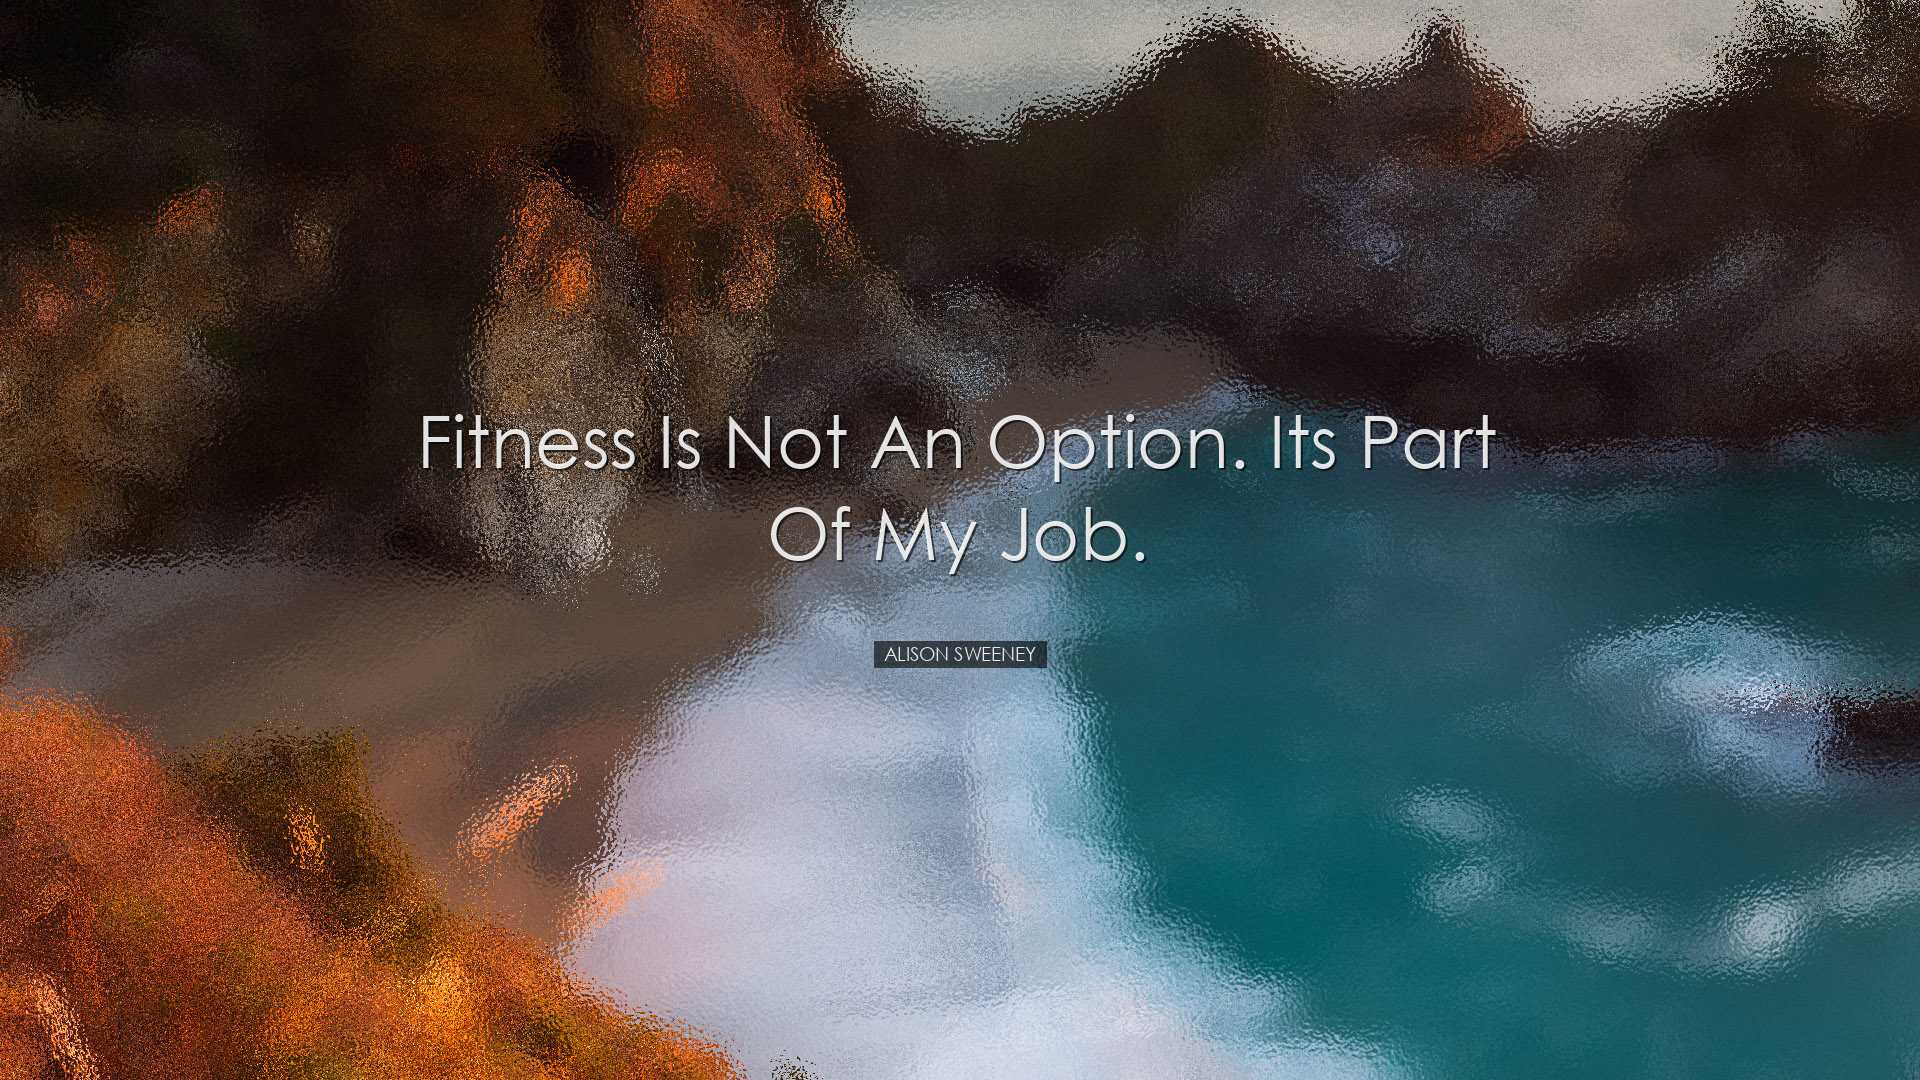 Fitness is not an option. Its part of my job. - Alison Sweeney